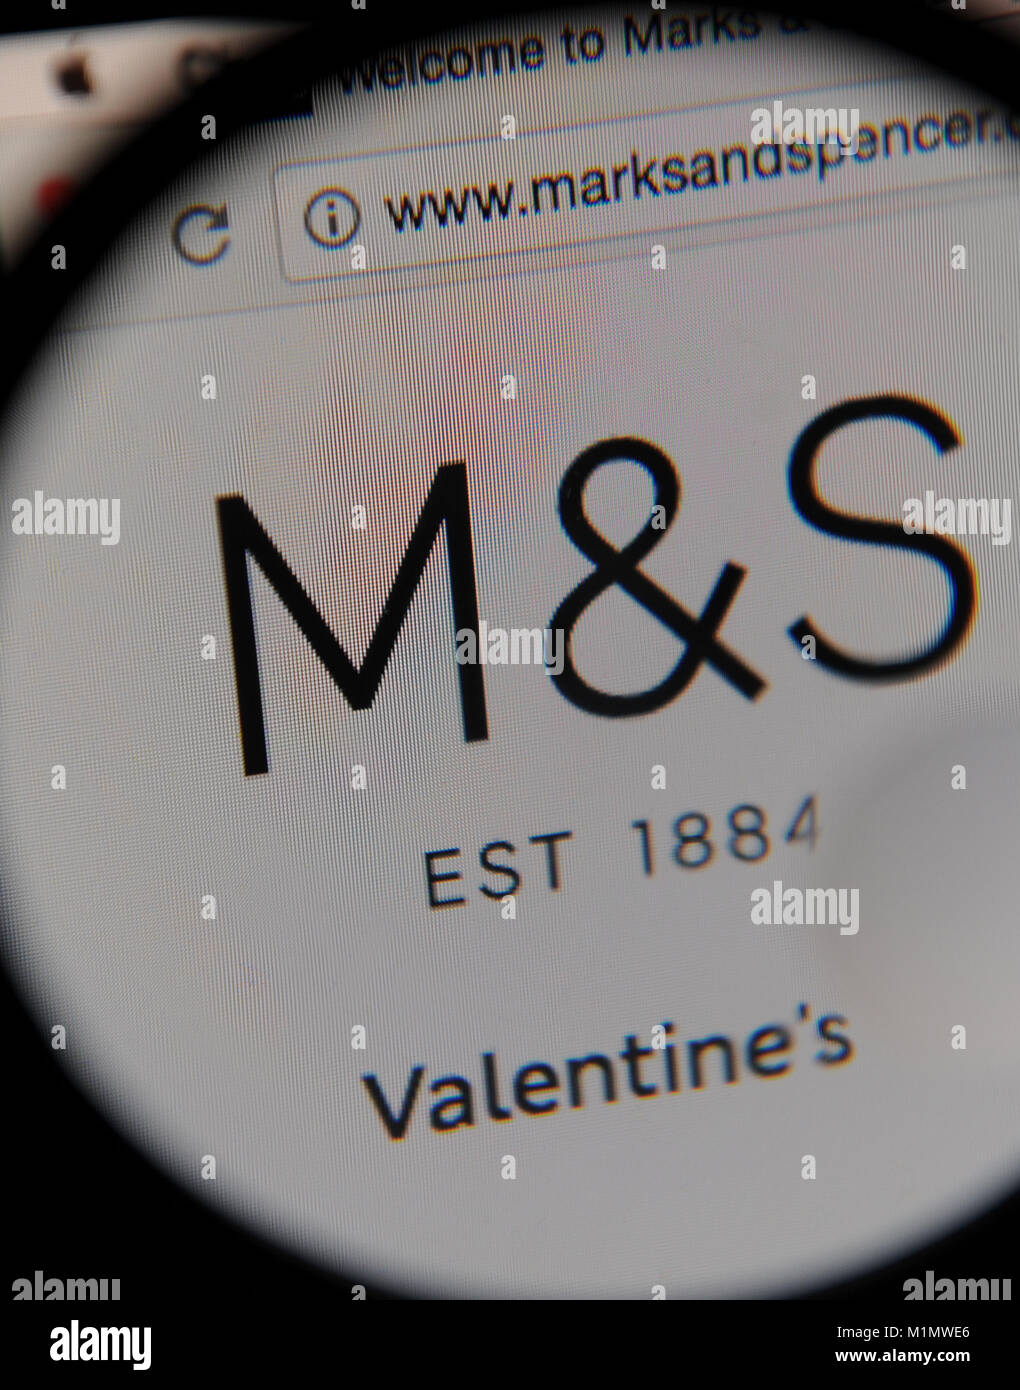 The Marks and Spencer website seen through a magnifying glass Stock Photo